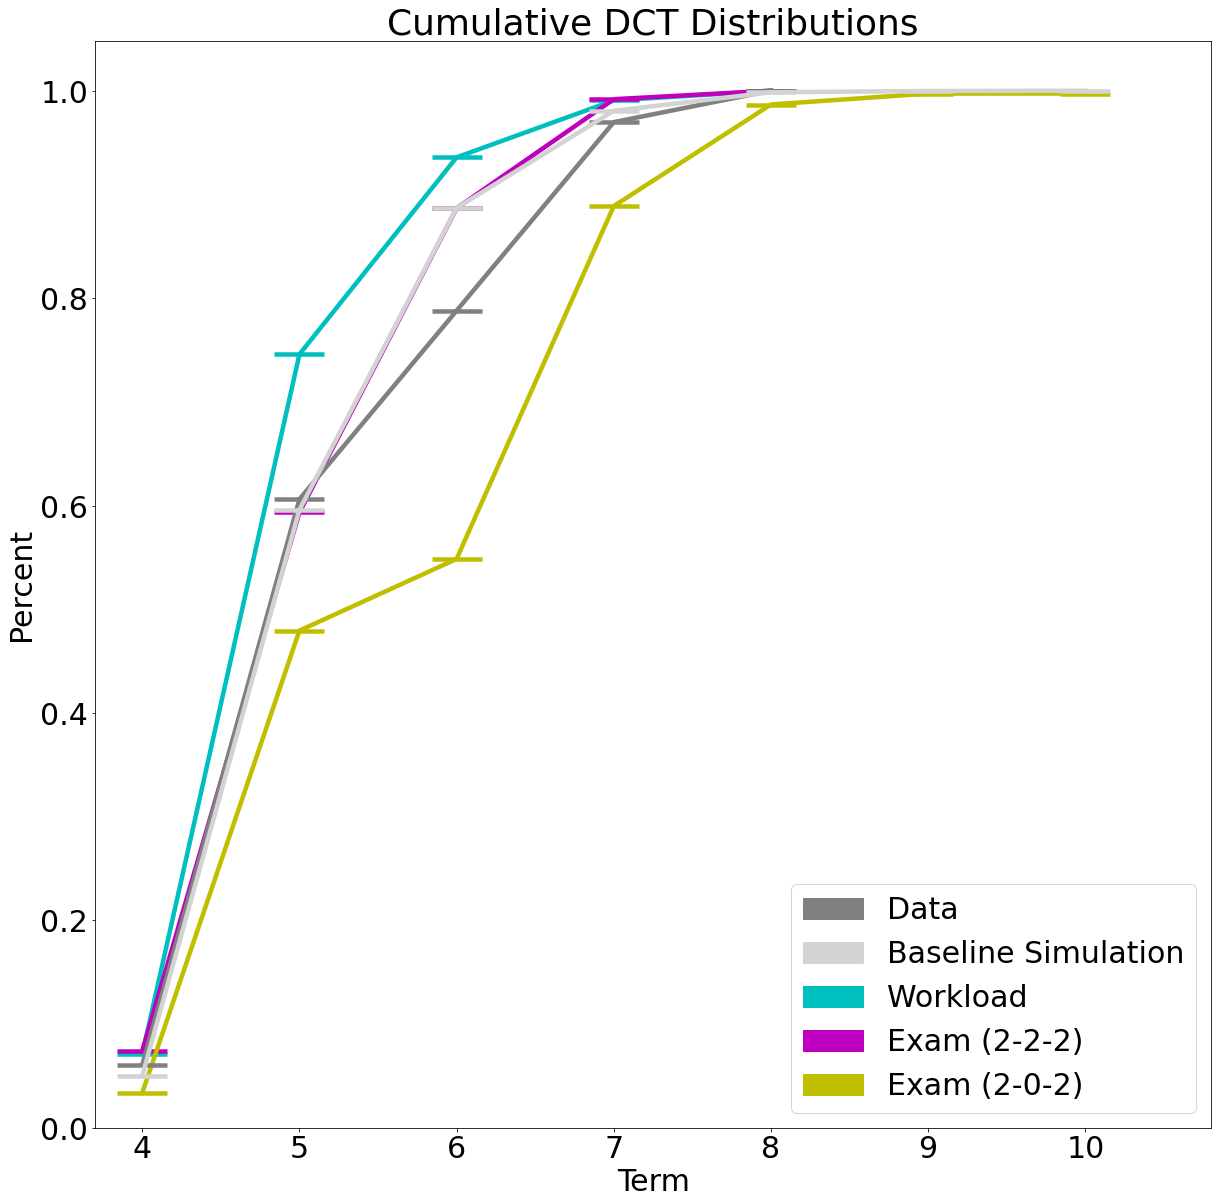 Cumulative plot of Degree Completion Time distributions of data, baseline simulation, policy changes.